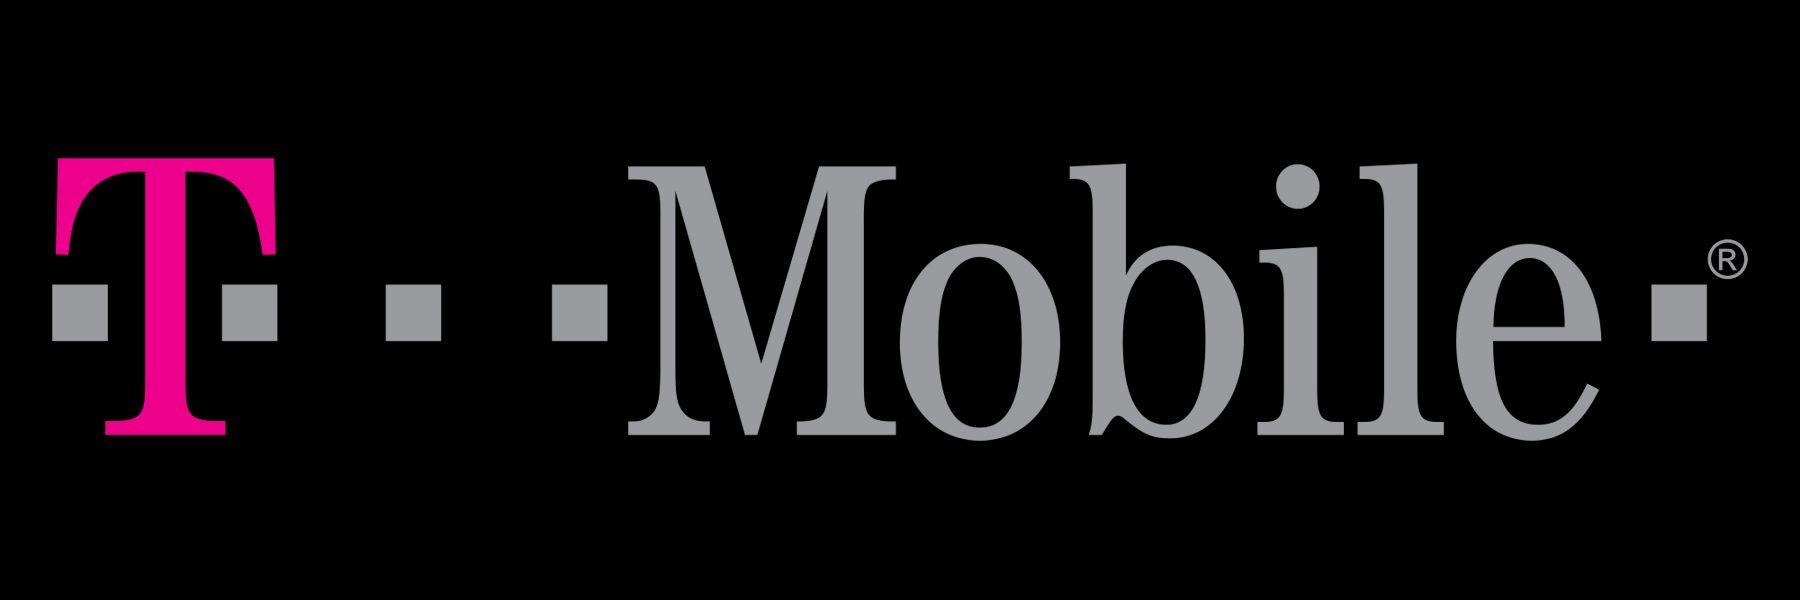 T- Mobile Logo - T-Mobile Logo, T-Mobile Symbol, Meaning, History and Evolution